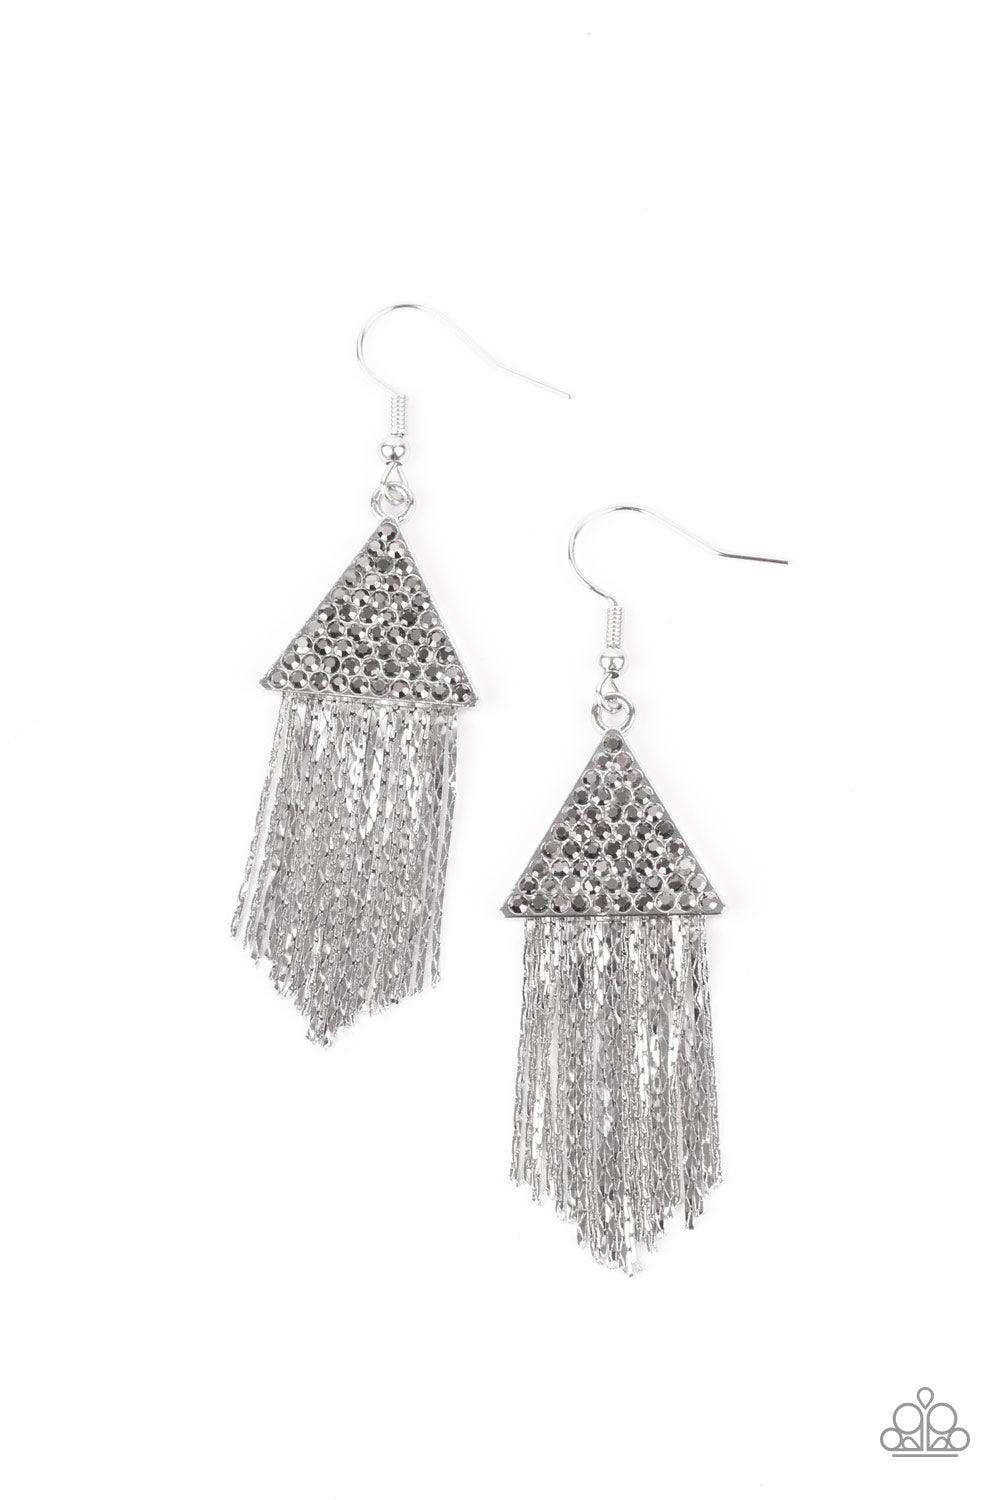 Paparazzi Accessories Pyramid SHEEN - Silver Encrusted in dainty hematite rhinestones, a silver triangle frame gives way to a tapered fringe of flat silver chains for a smoldering effect. Earring attaches to a standard fishhook fitting. Sold as one pair o